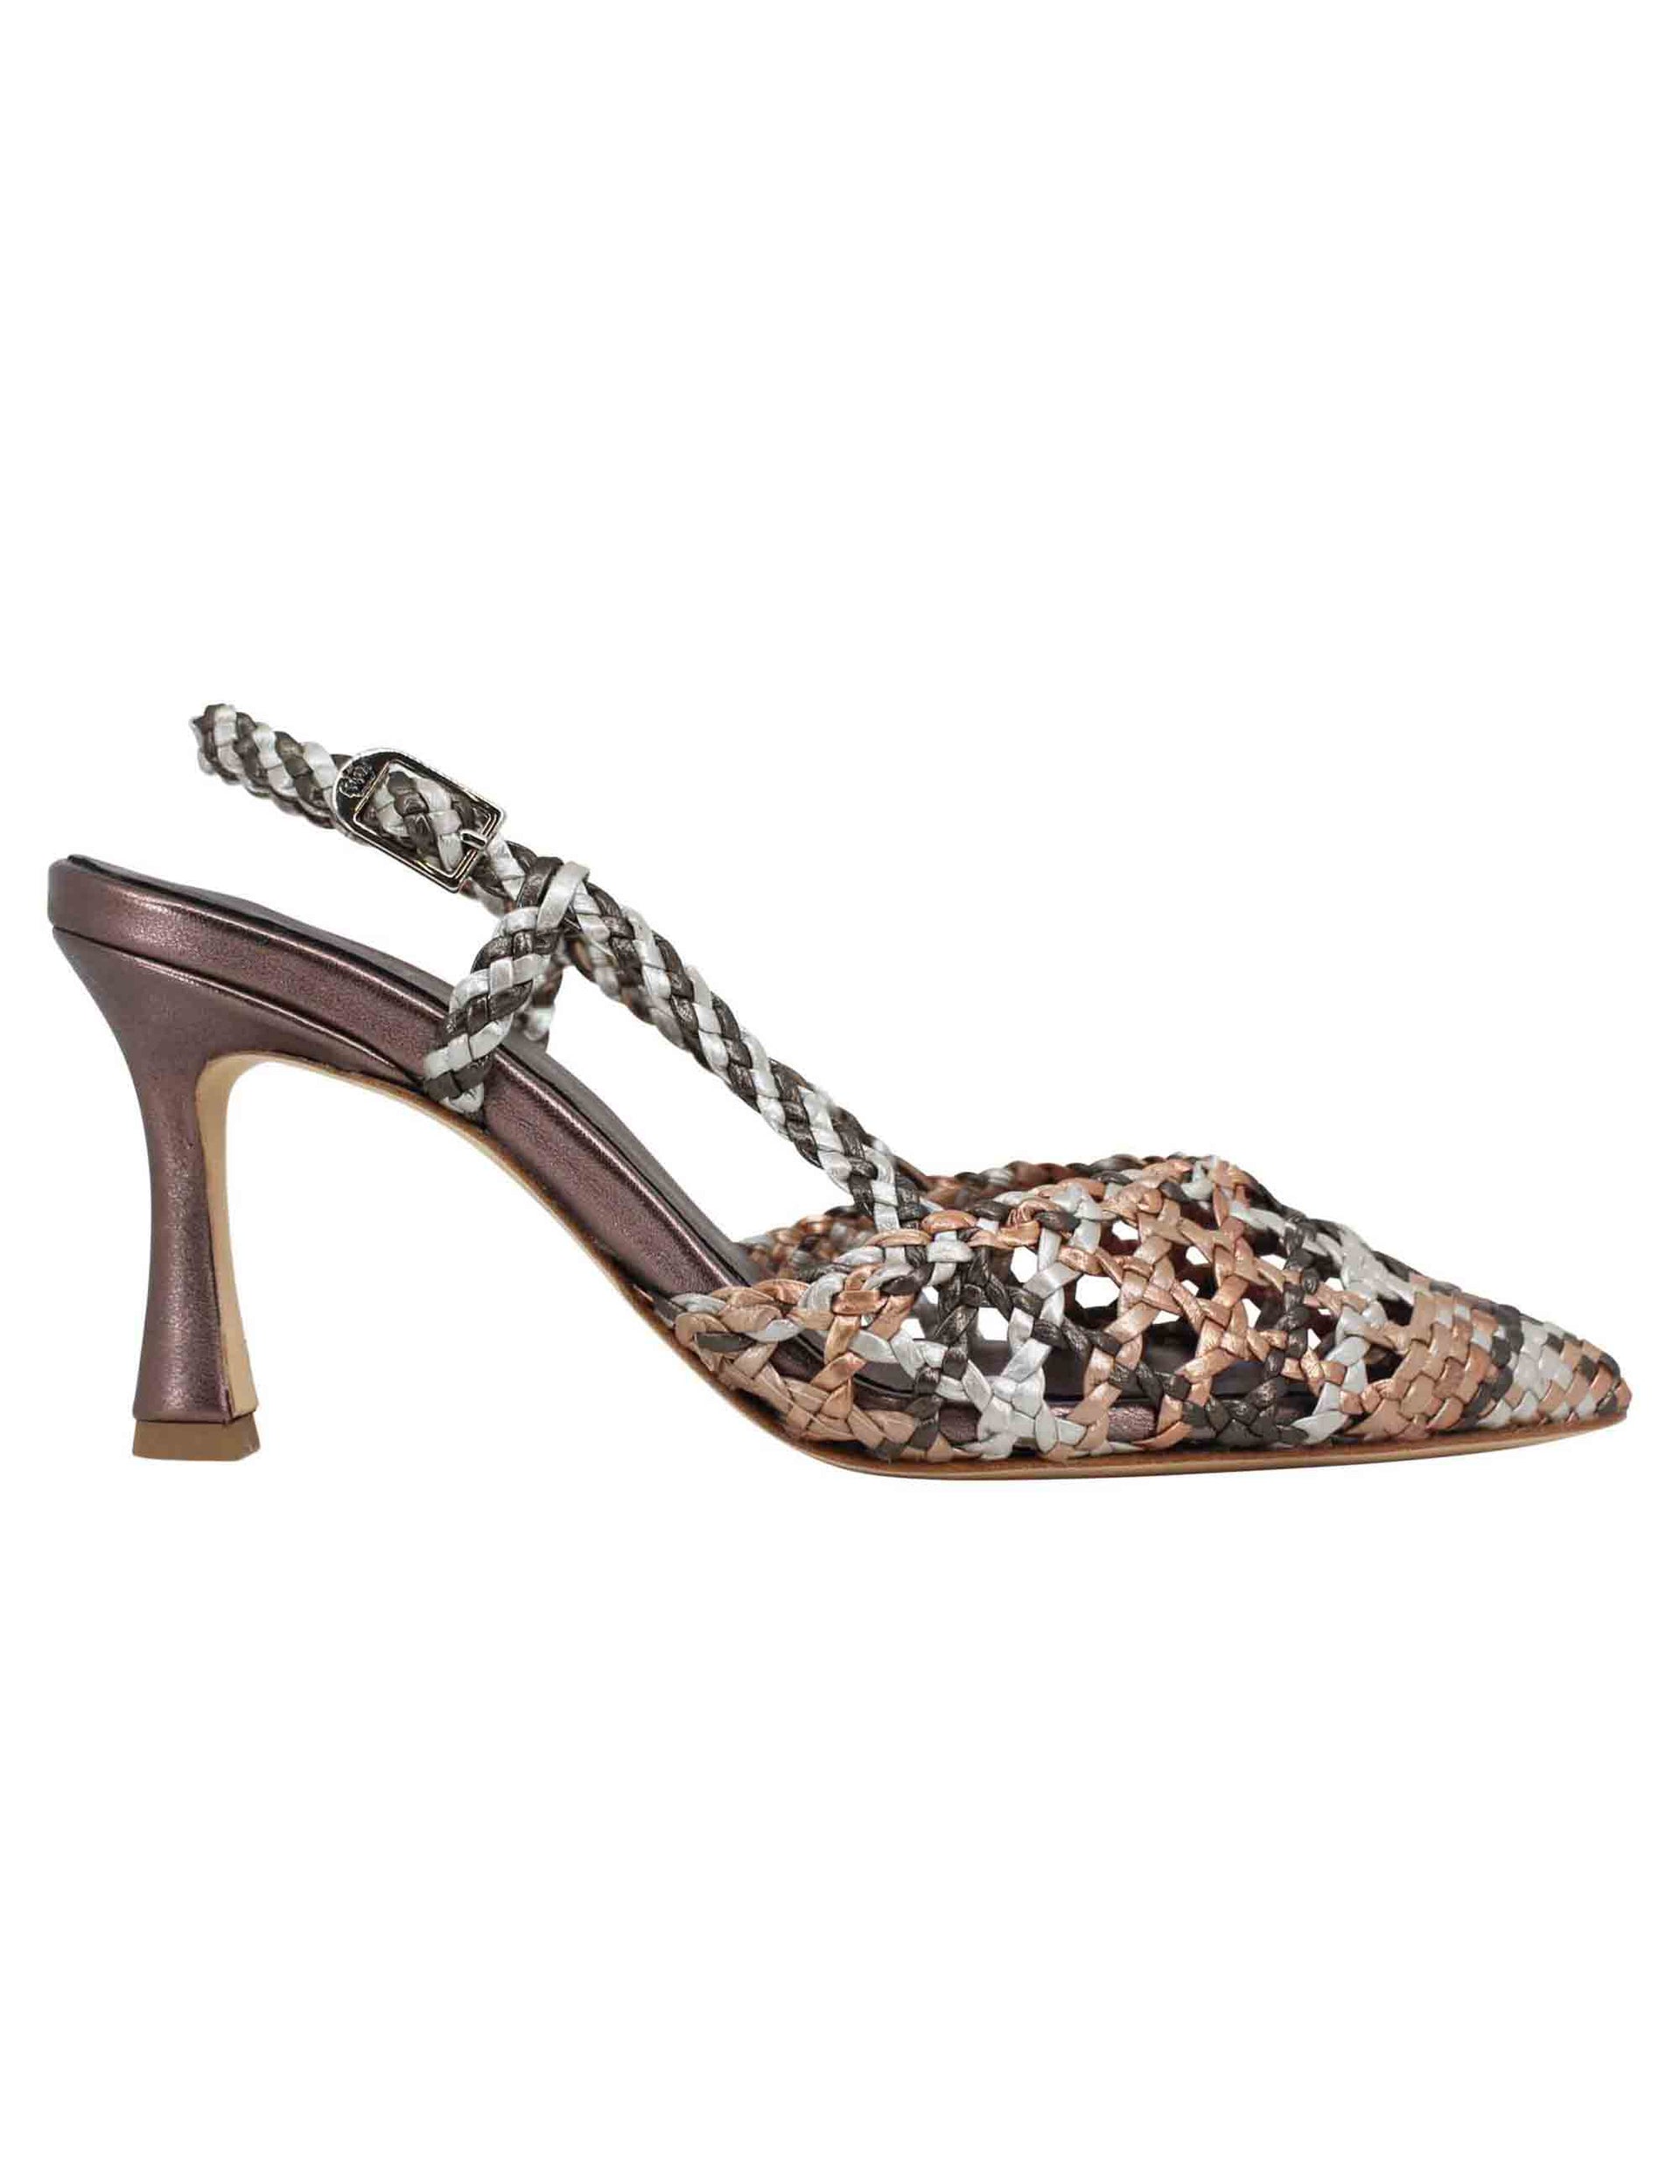 Women's slingback pumps in laminated taupe woven leather with high heel